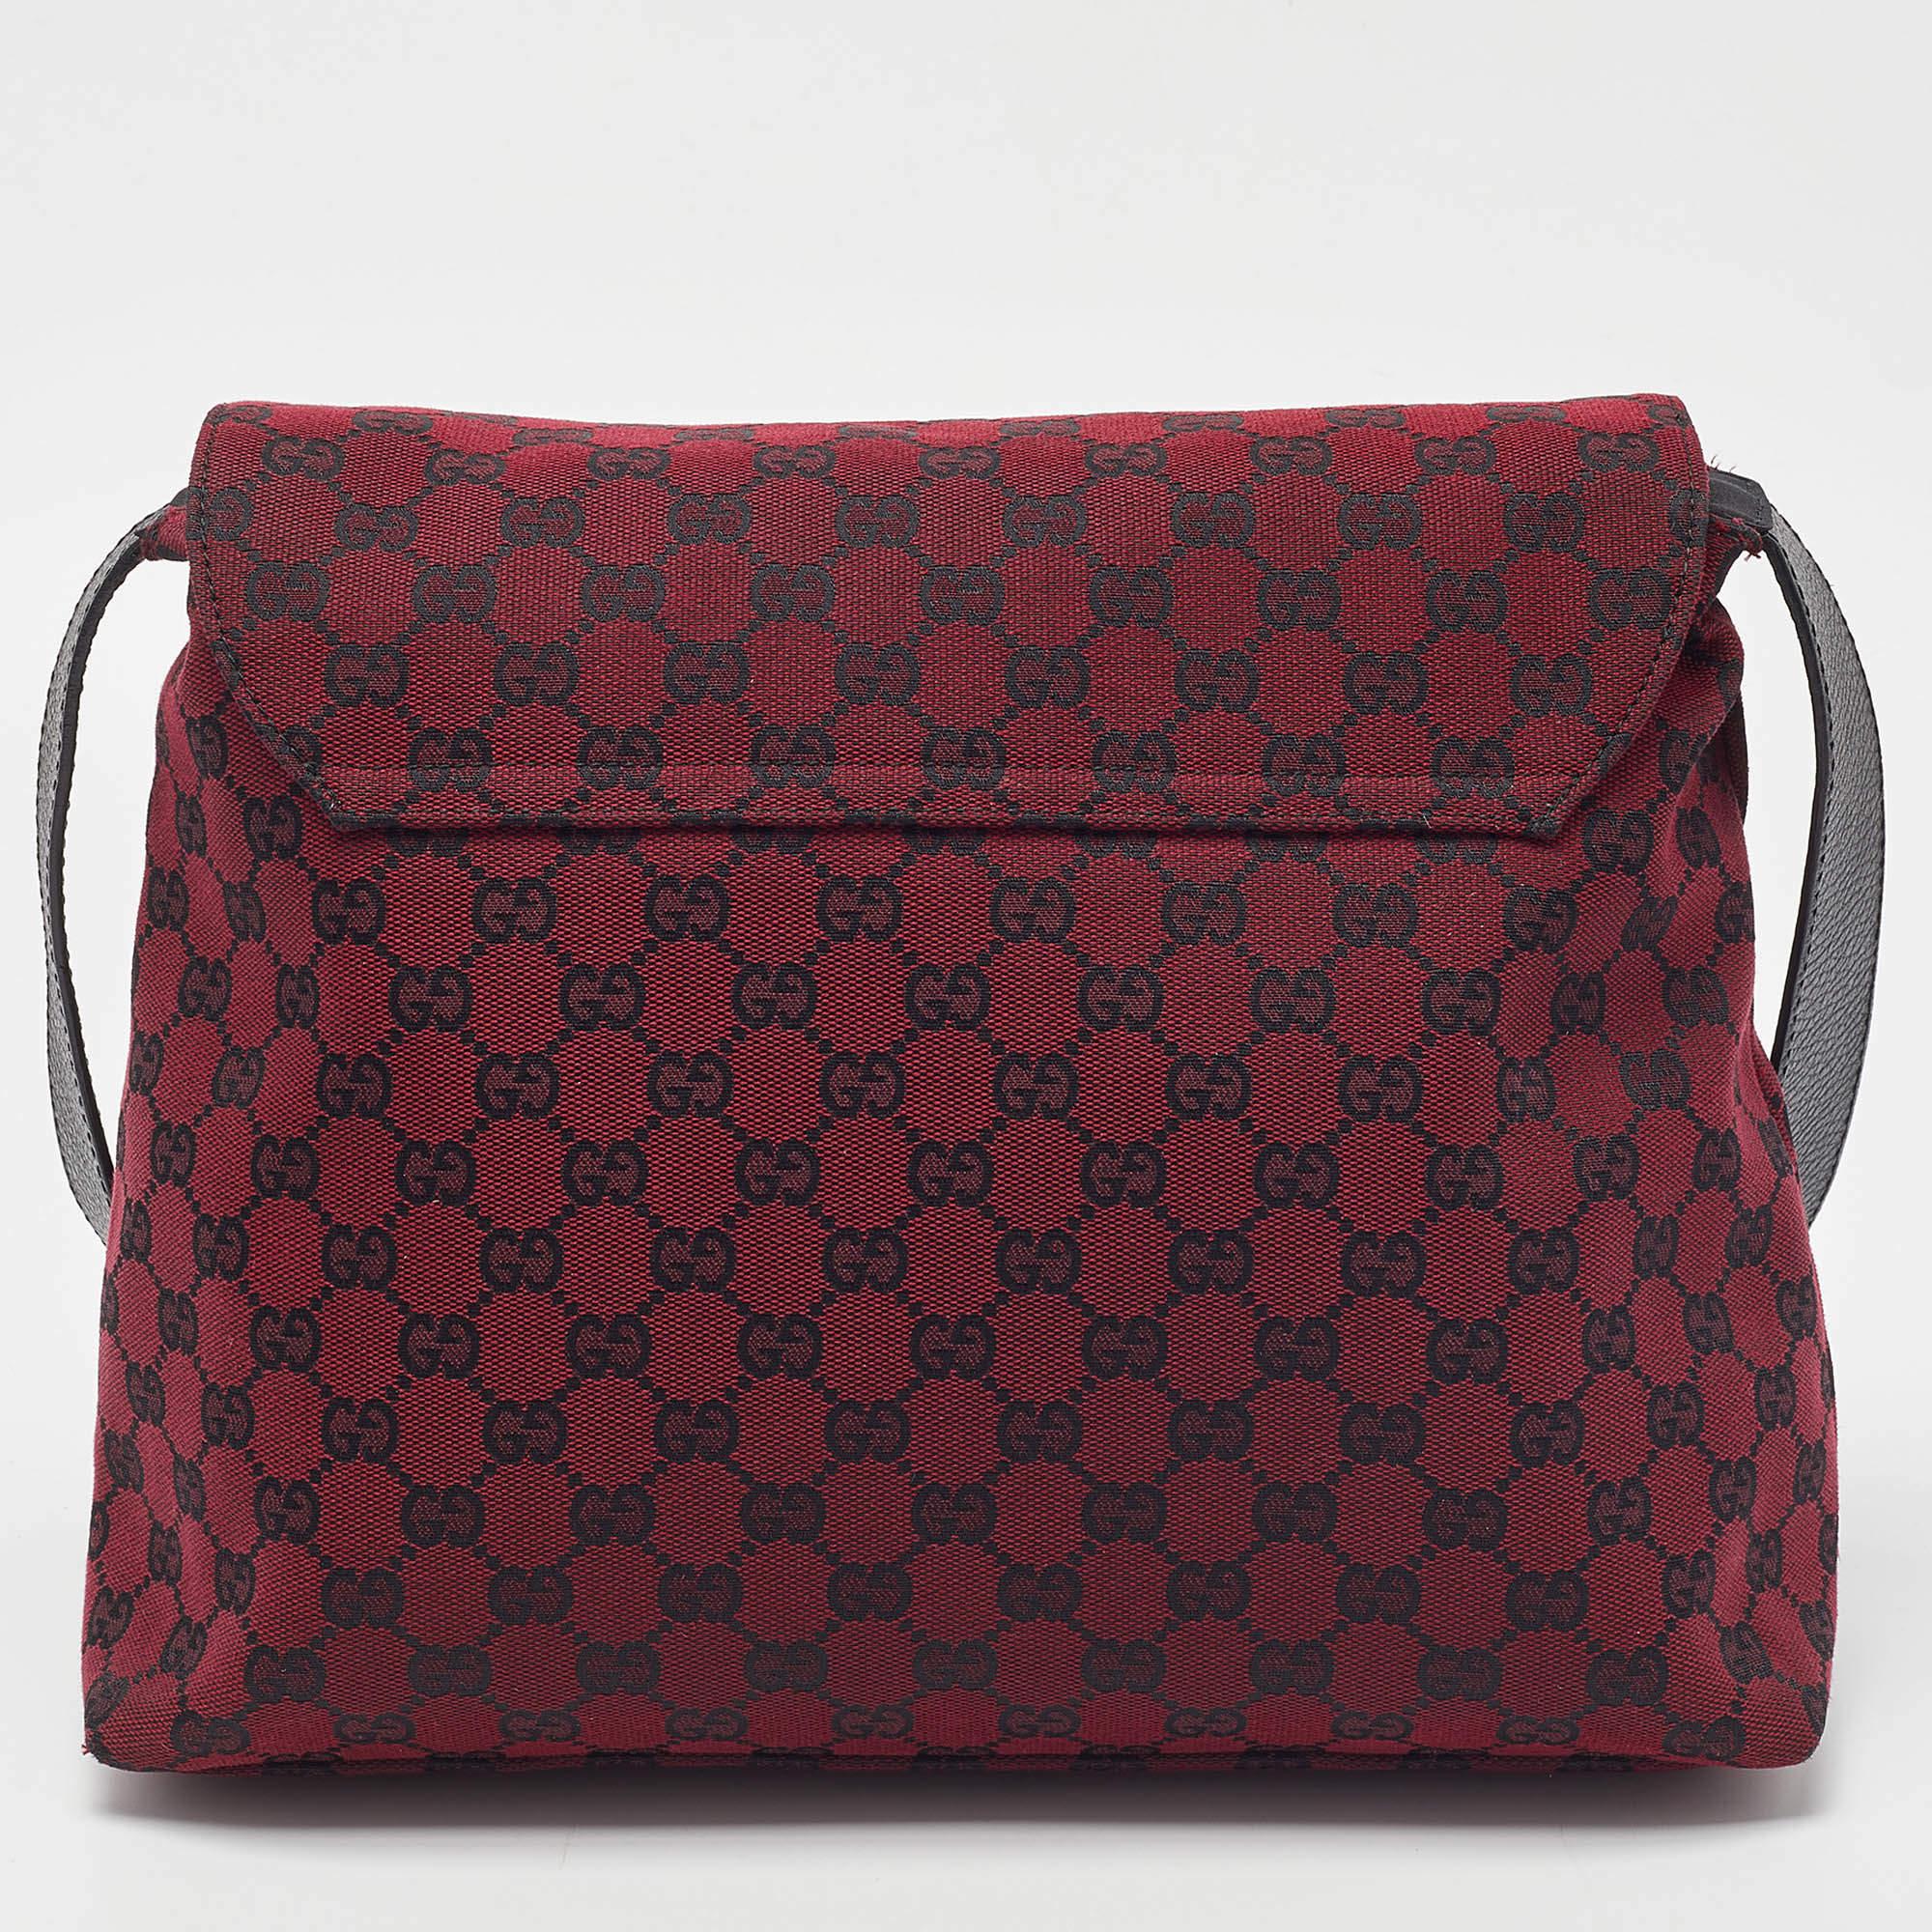 This Gucci messenger bag is an example of the brand's fine designs that are skillfully crafted to project a classic charm. It is a functional creation with an elevating appeal.

